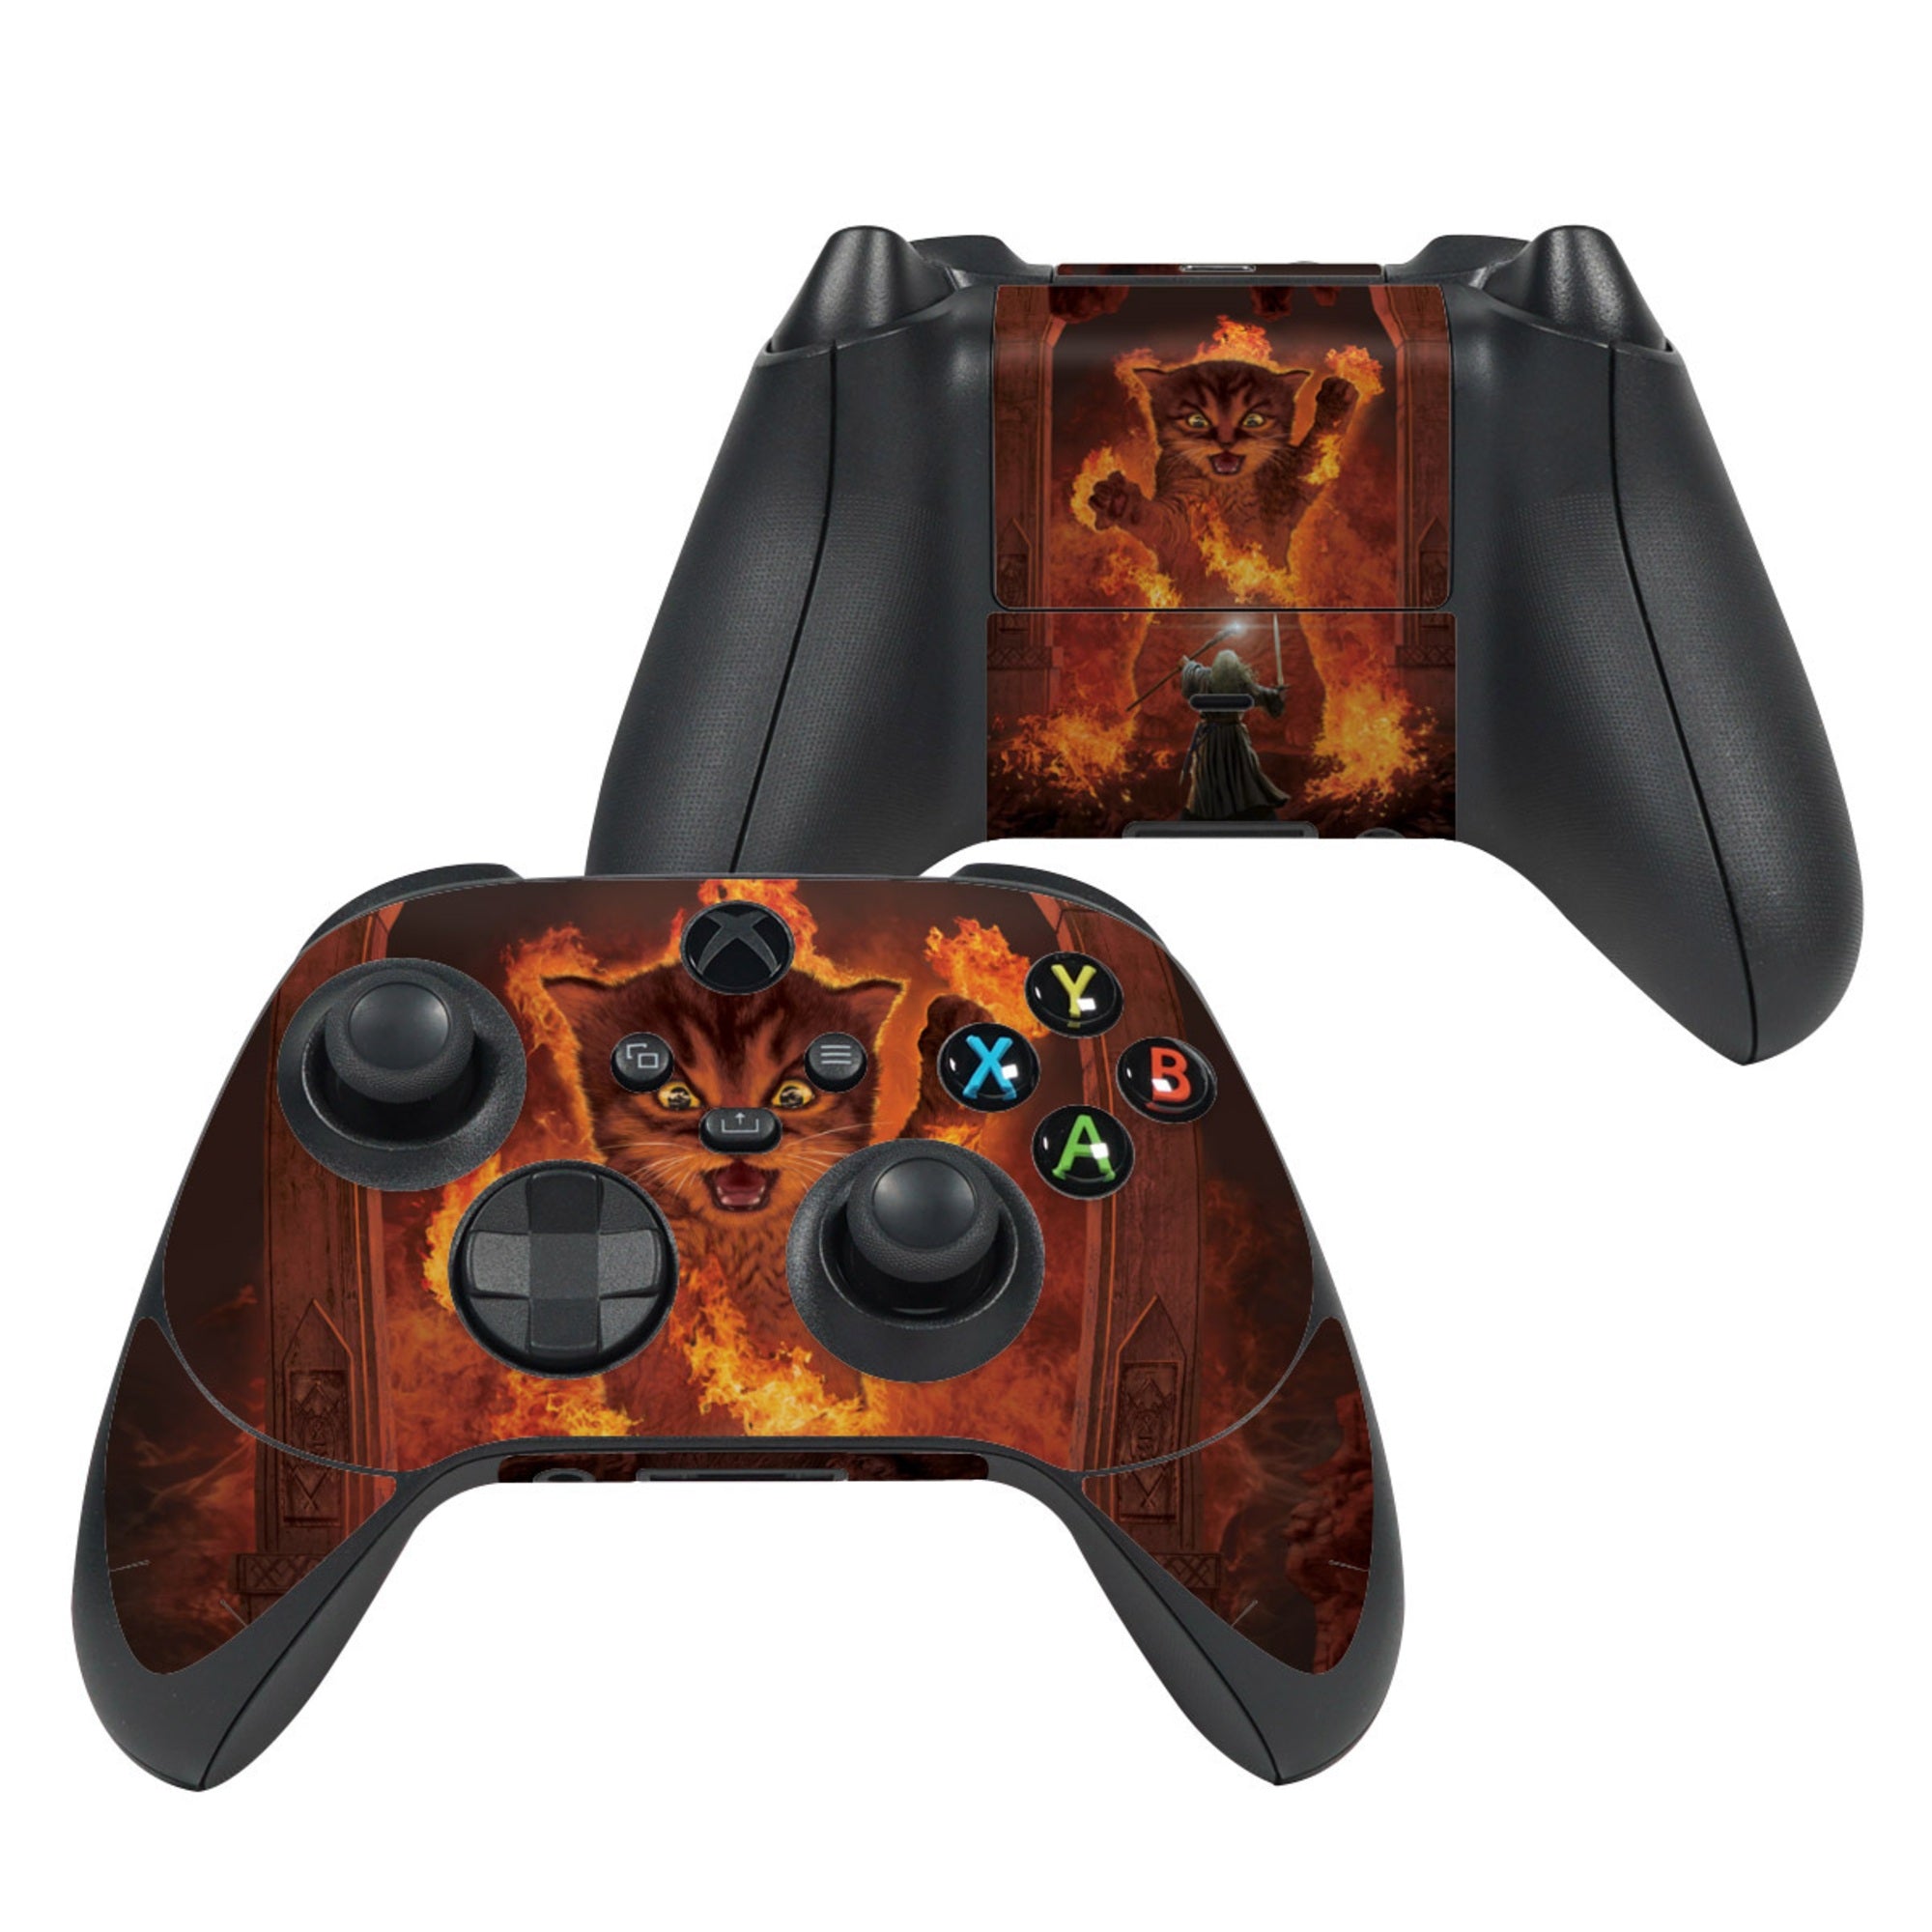 You Shall Not Pass - Microsoft Xbox Series X Controller Skin